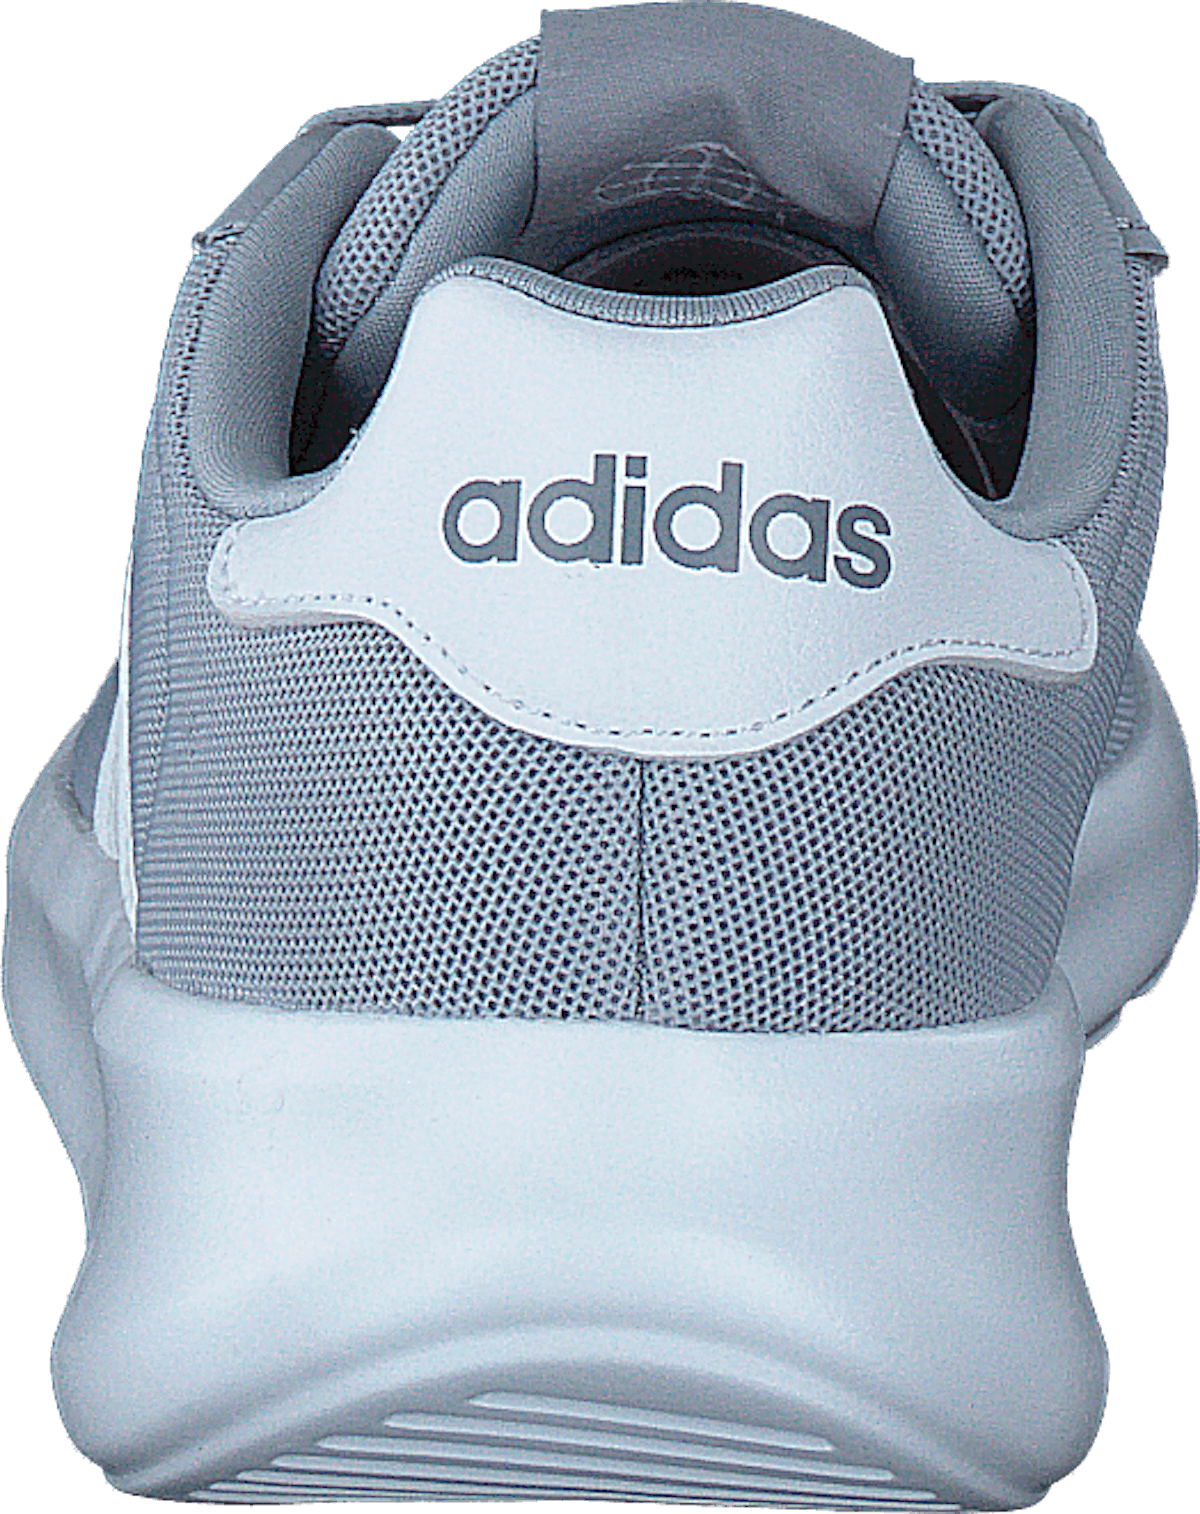 Lite Racer 3.0 Shoes Halo Silver / Cloud White / Grey Two